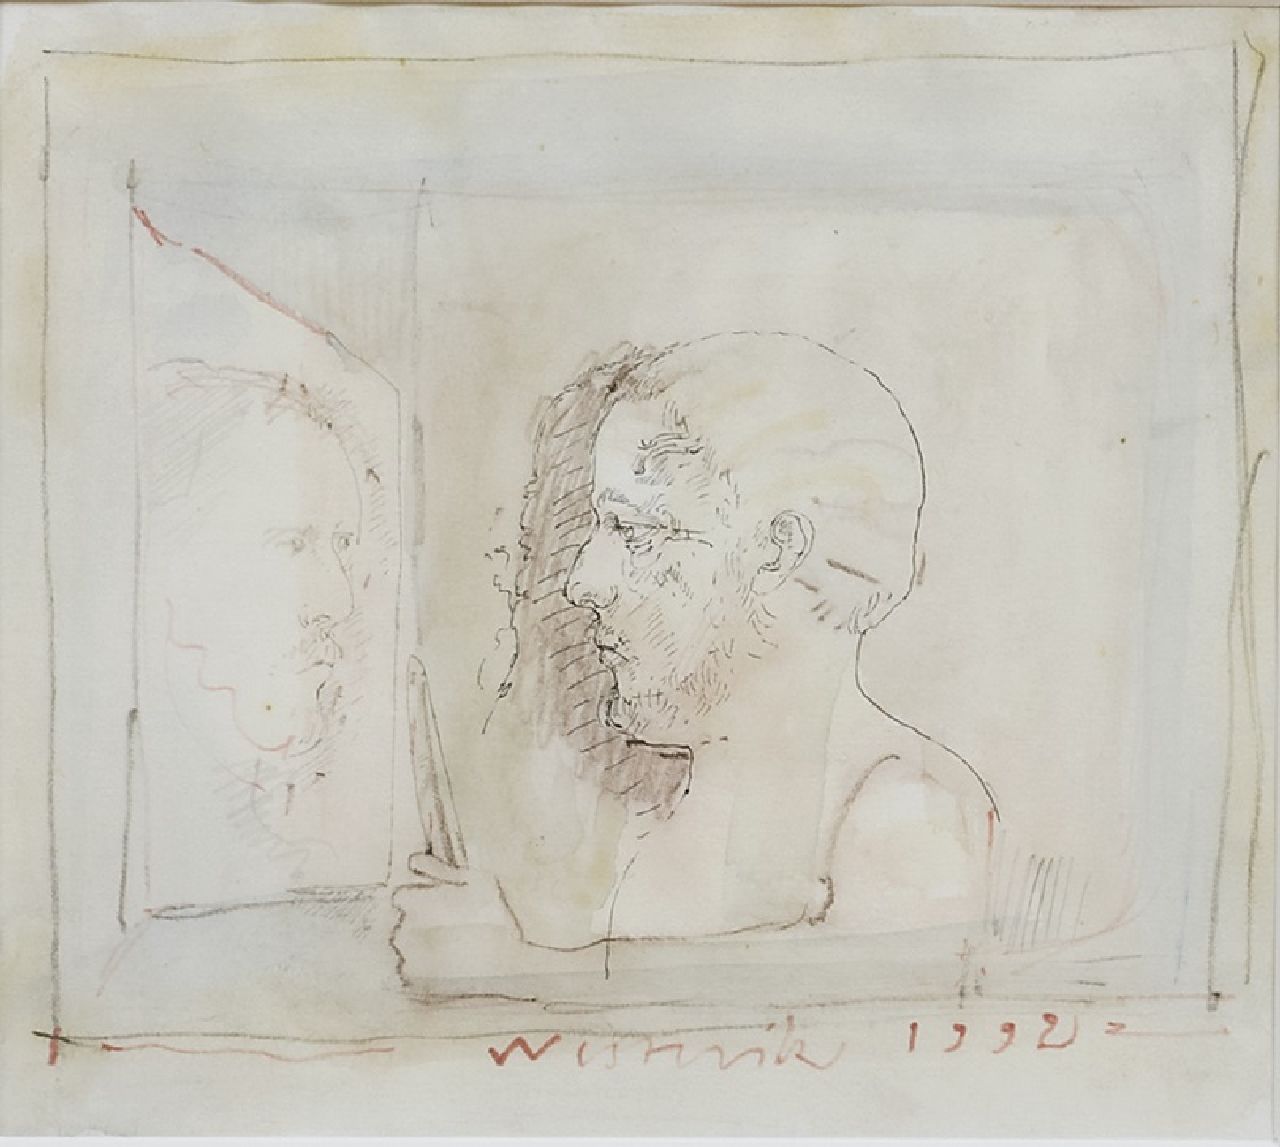 Westerik J.  | Jacobus 'Co' Westerik | Watercolours and drawings offered for sale | Man with knife and mirror-reflection, watercolour, blackchalk and ink on Japanese paper 19.0 x 21.0 cm, signed l.c. and dated 1992